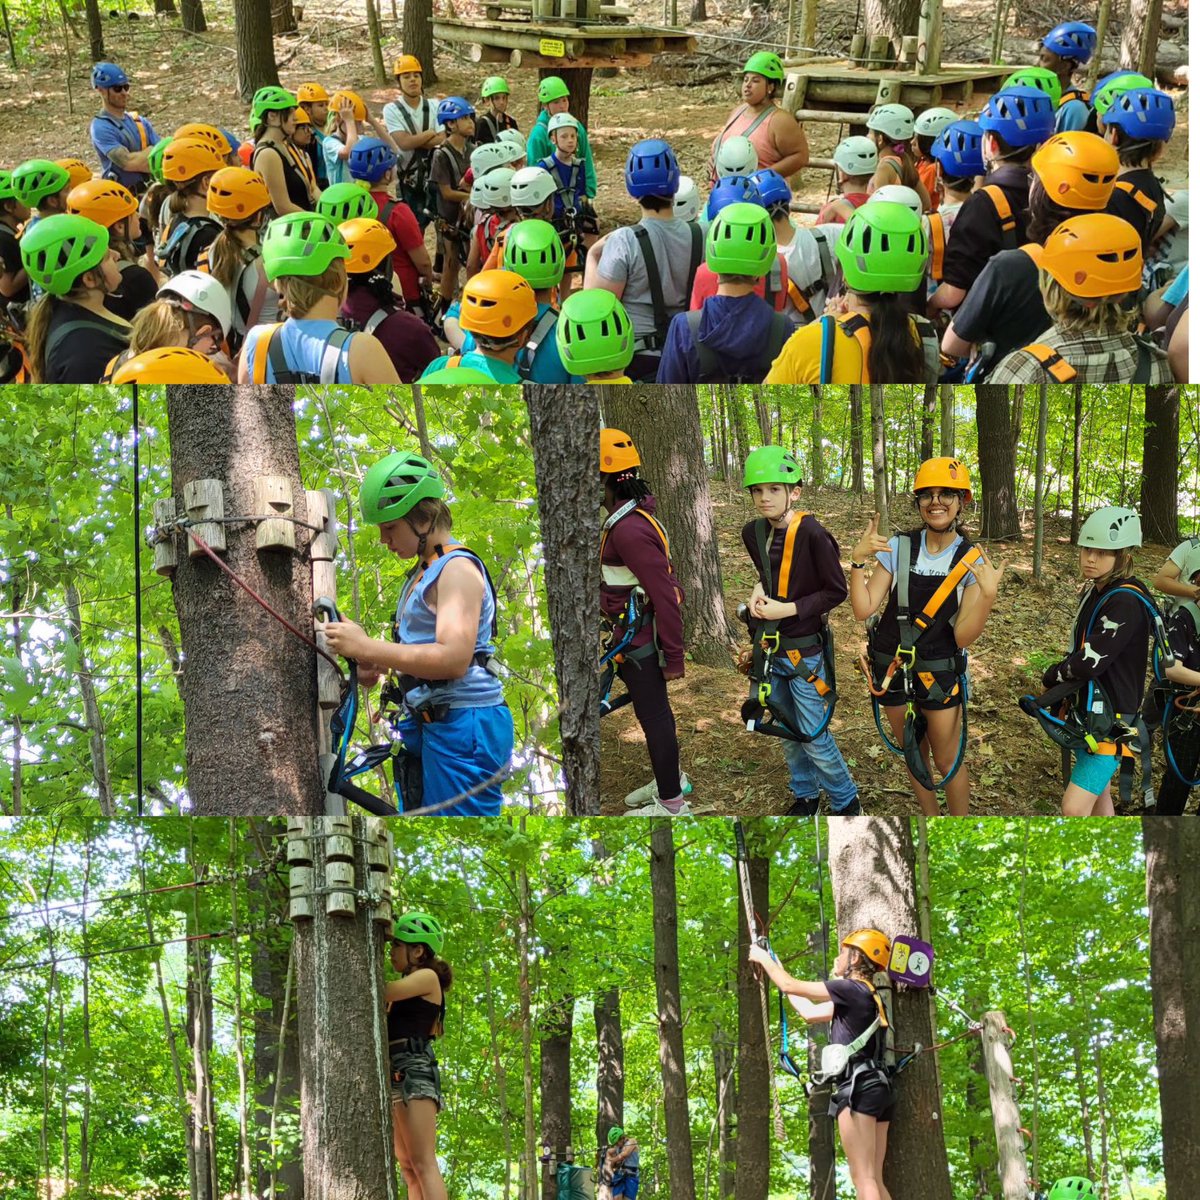 Our Knights were soaring to new heights on their year end field trip. We’re so proud of their adventurous spirit, risk taking and safety skills! 📸 🏆 🎉